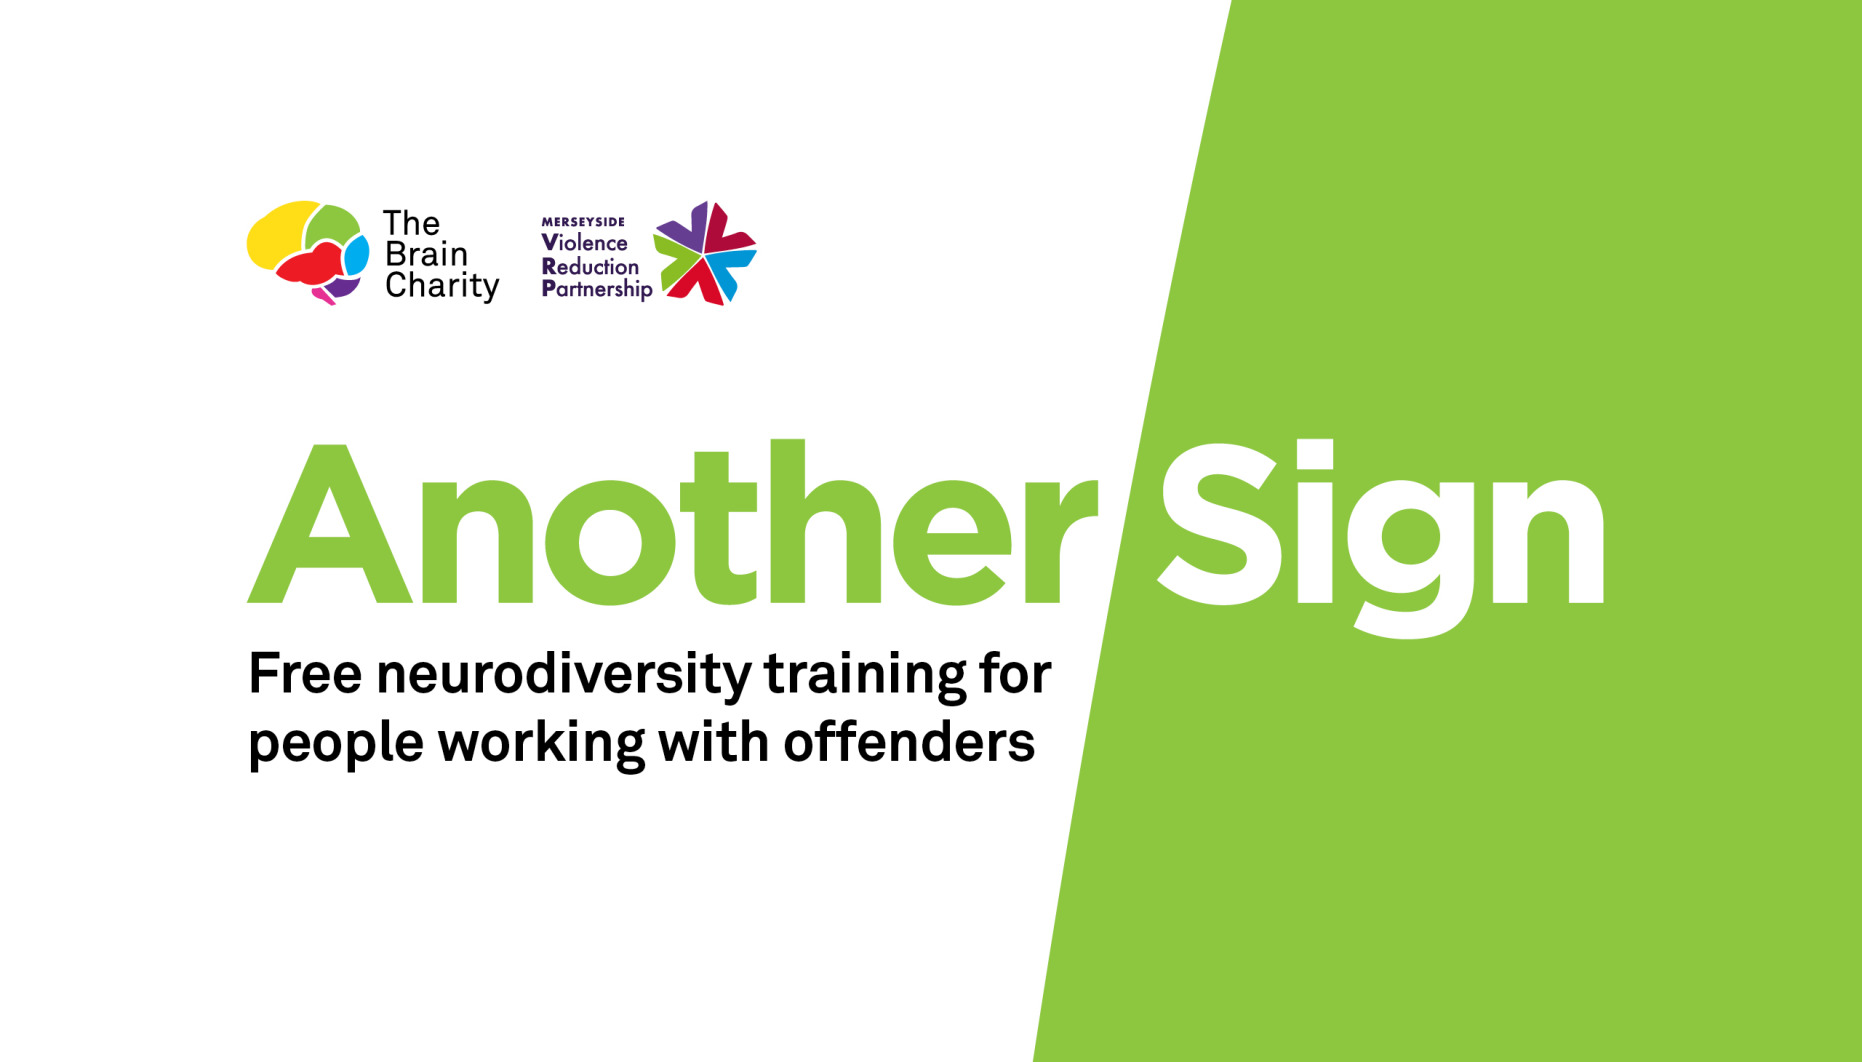 Another Sign: free neurodiversity training for people working with offenders